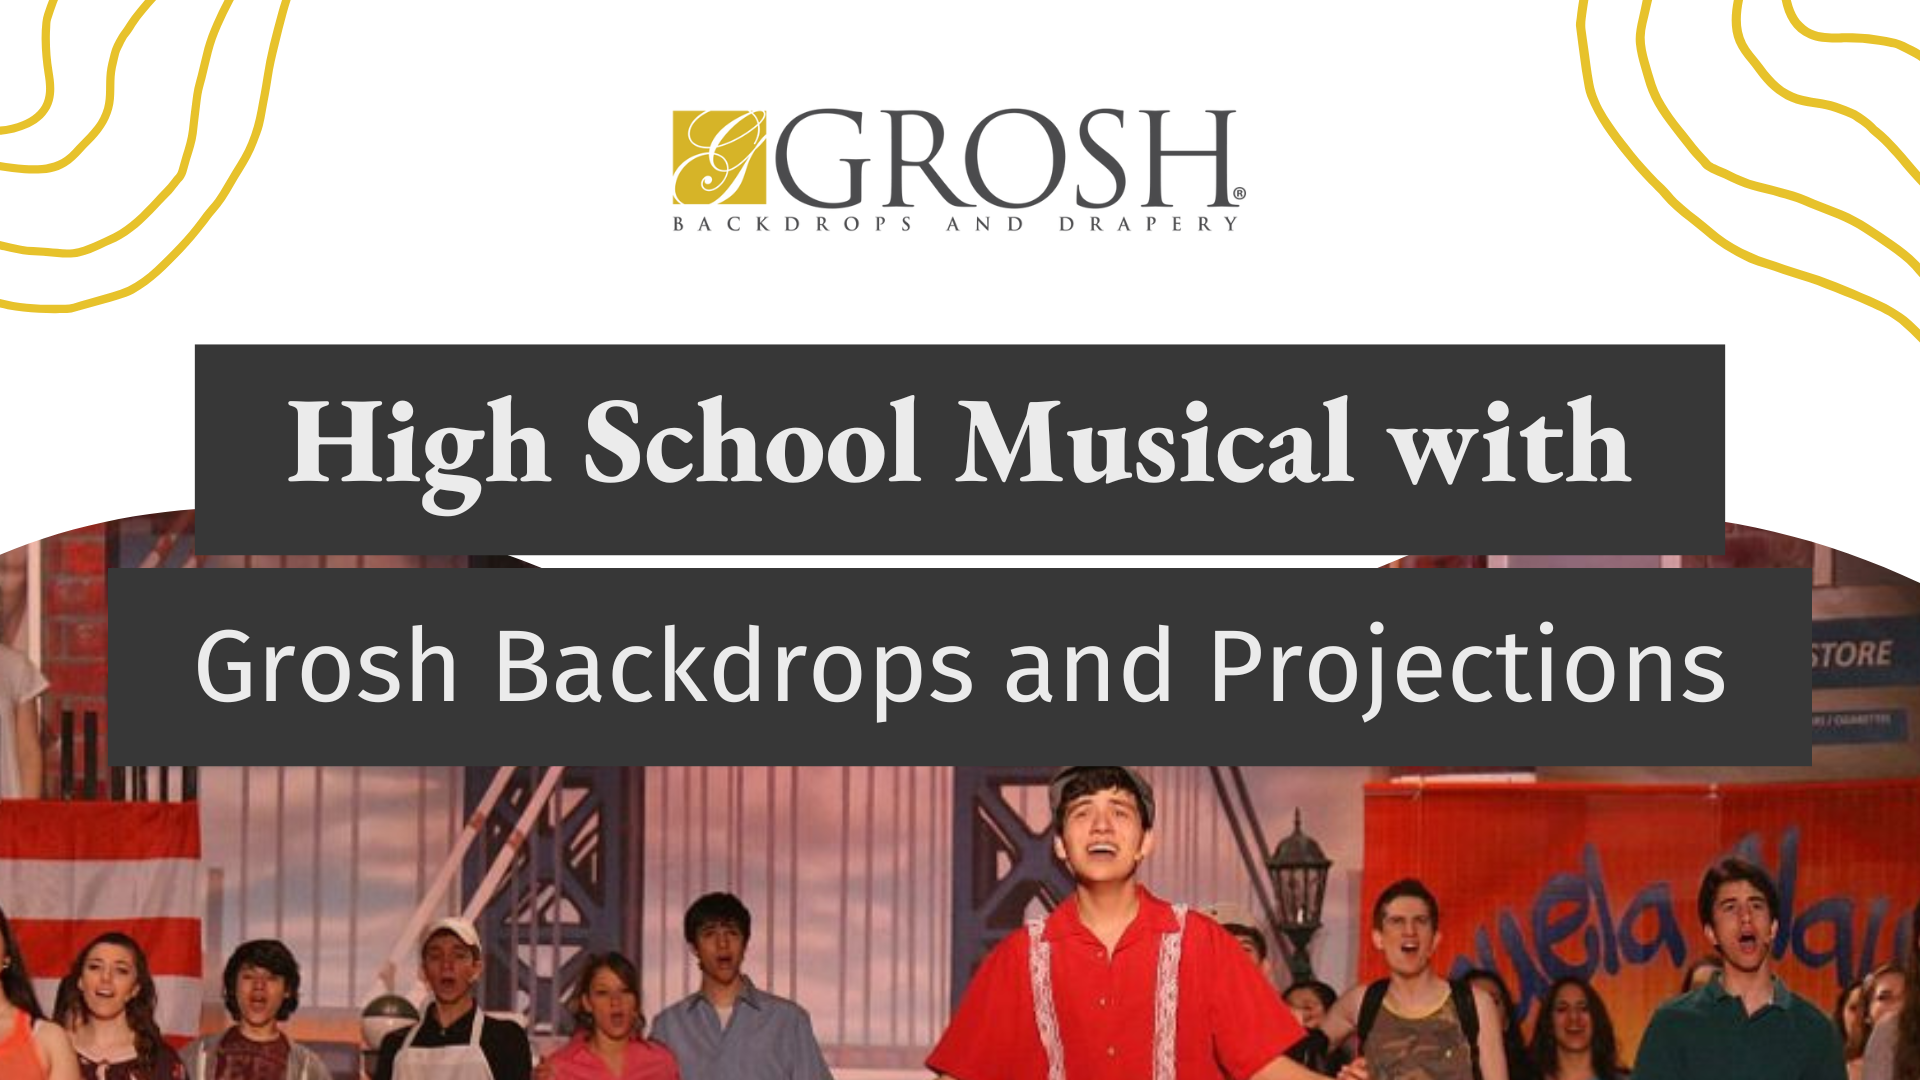 High School Musical with Grosh Backdrops and Projections